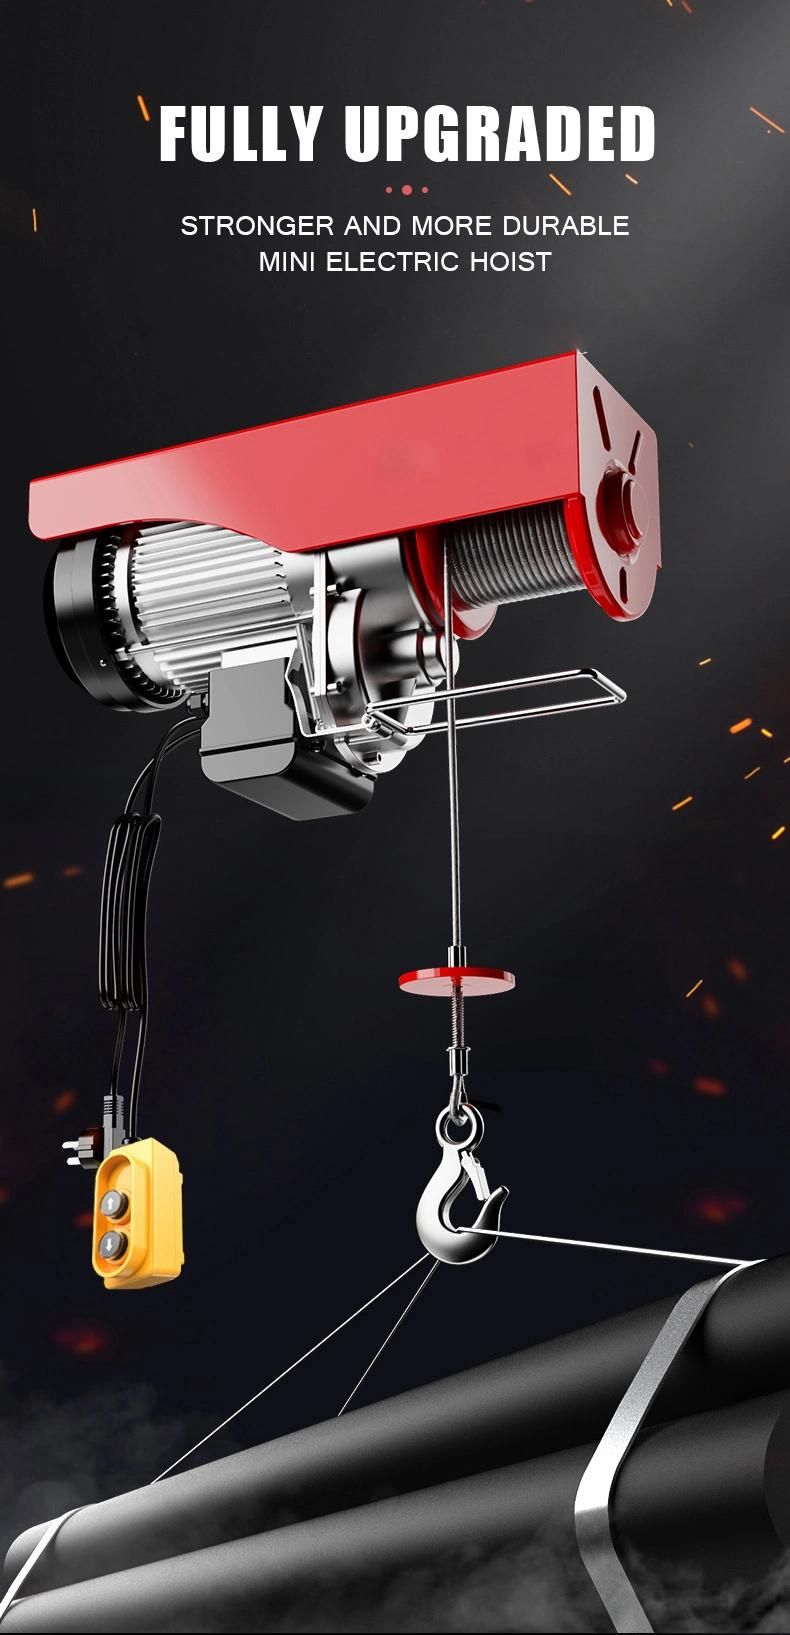 Load Capacity 125/250kg Wire Rople Electric Hoist with Voltage 220